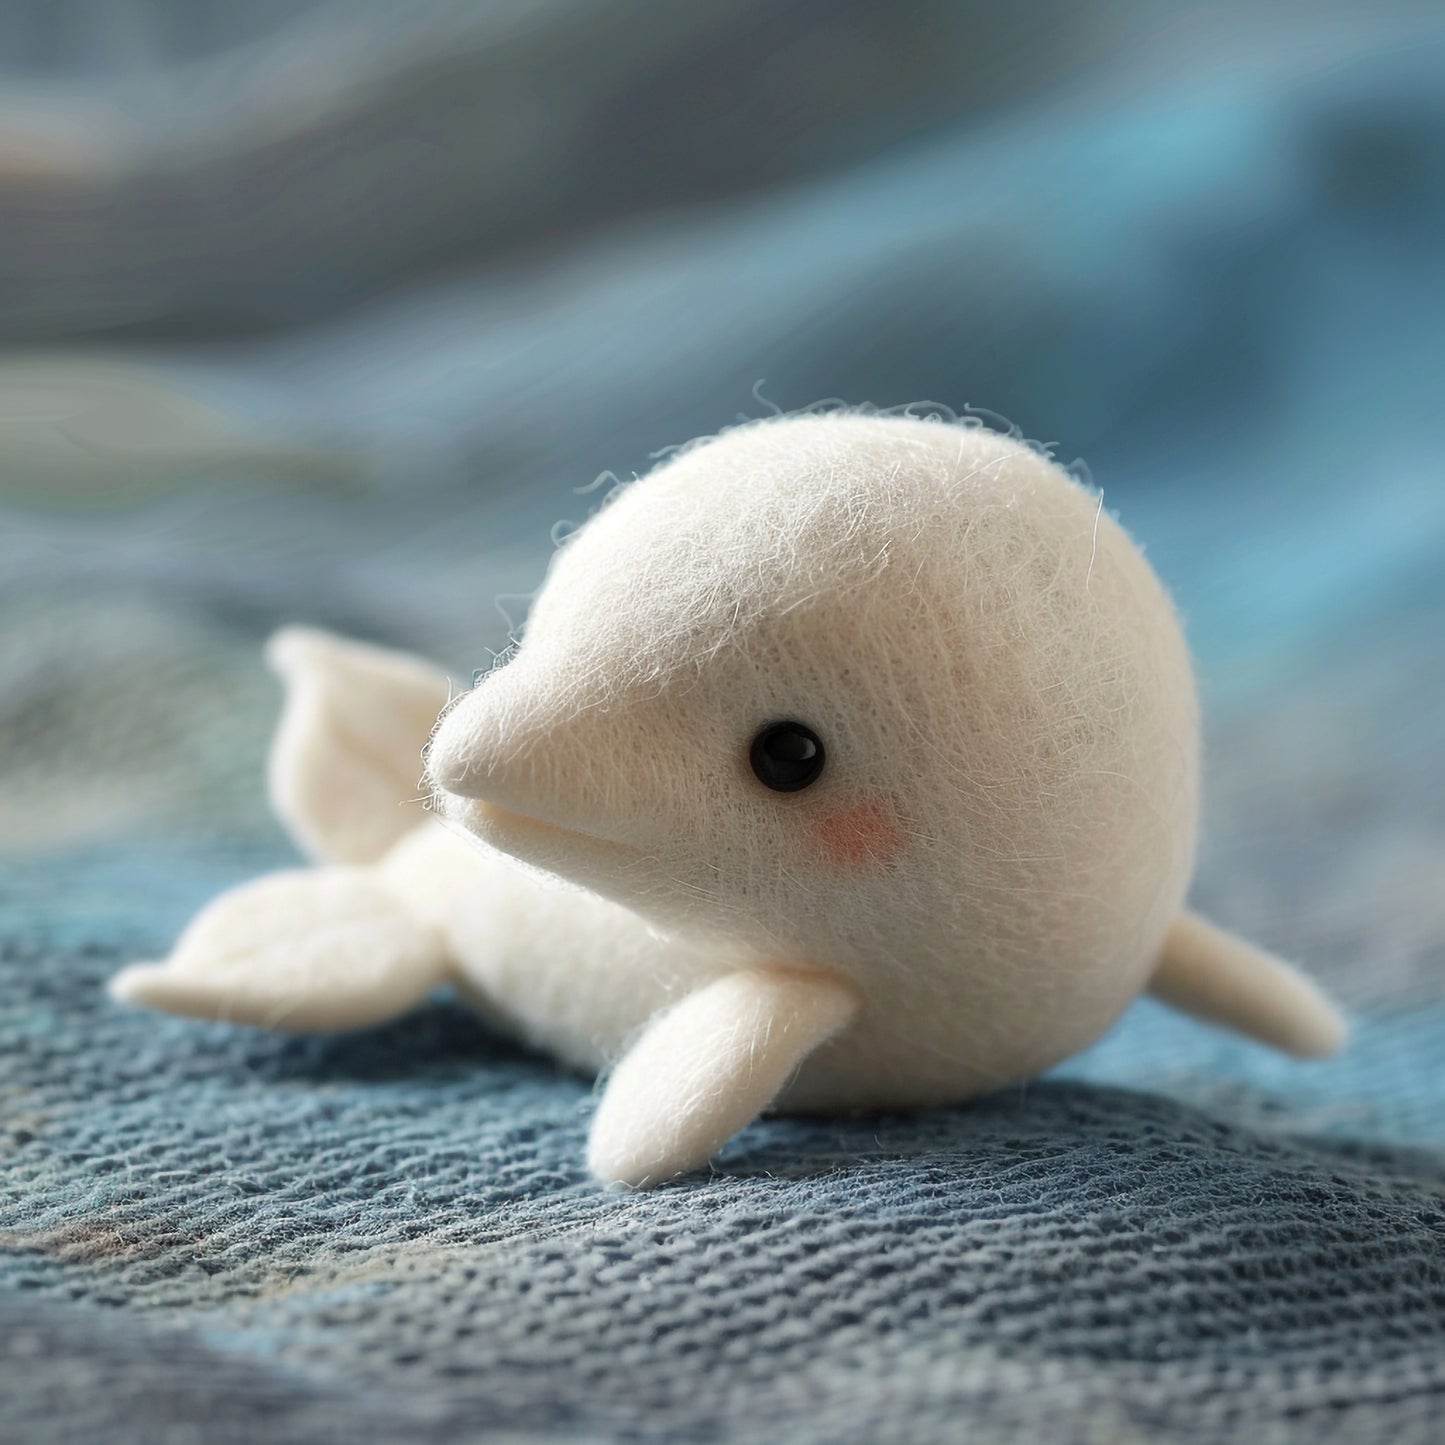 Adorable Needle Felted Beluga Whale Toy on Textured Background